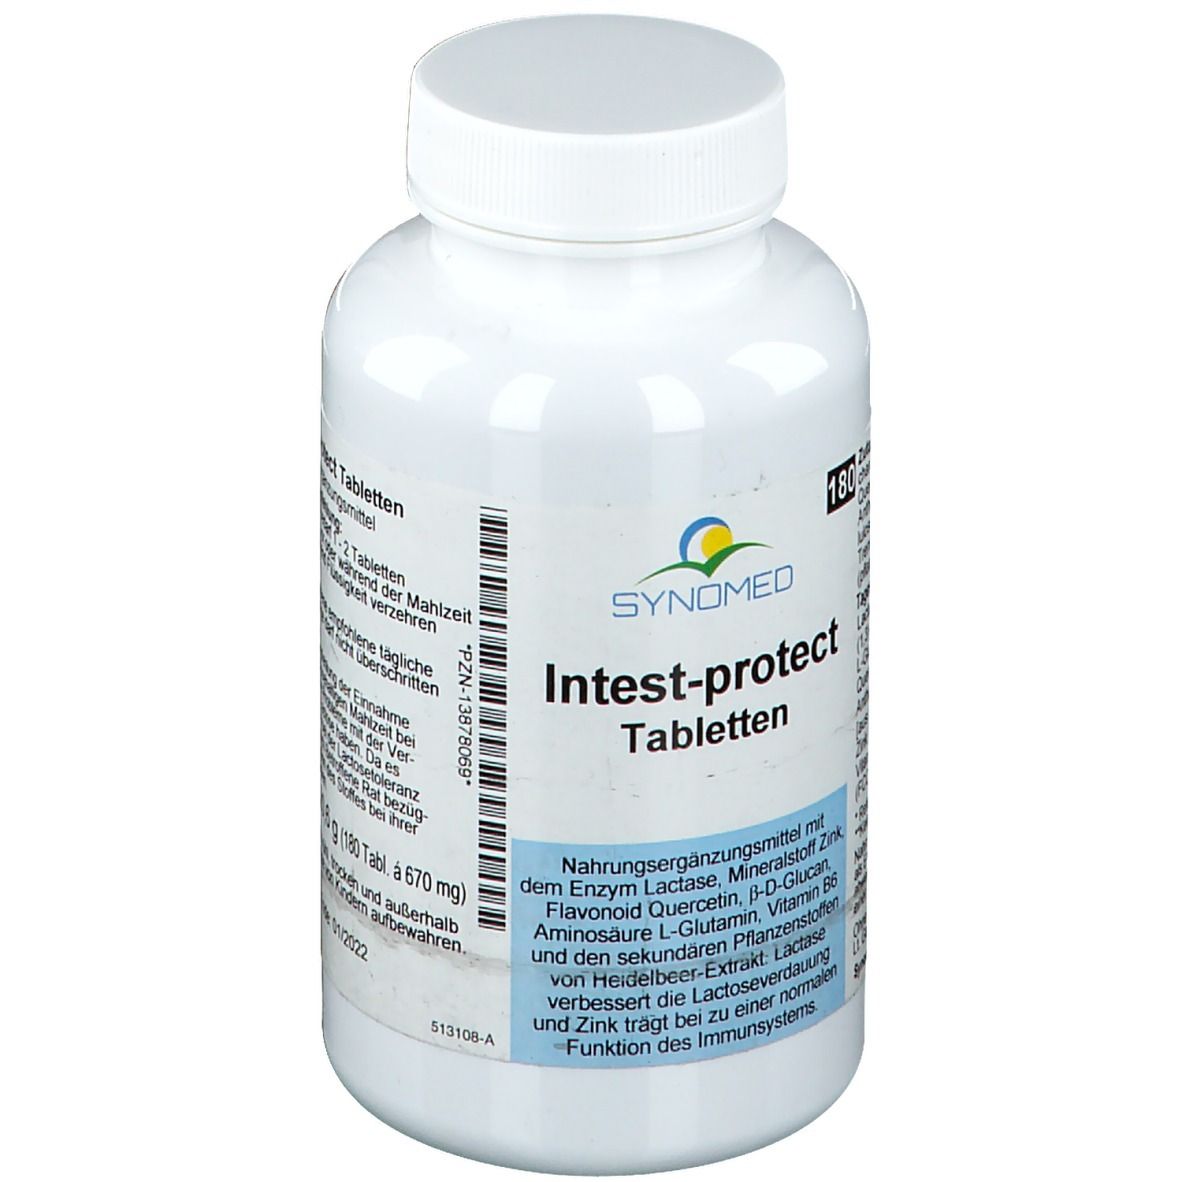 SYNOMED Intest-protect Tabletten